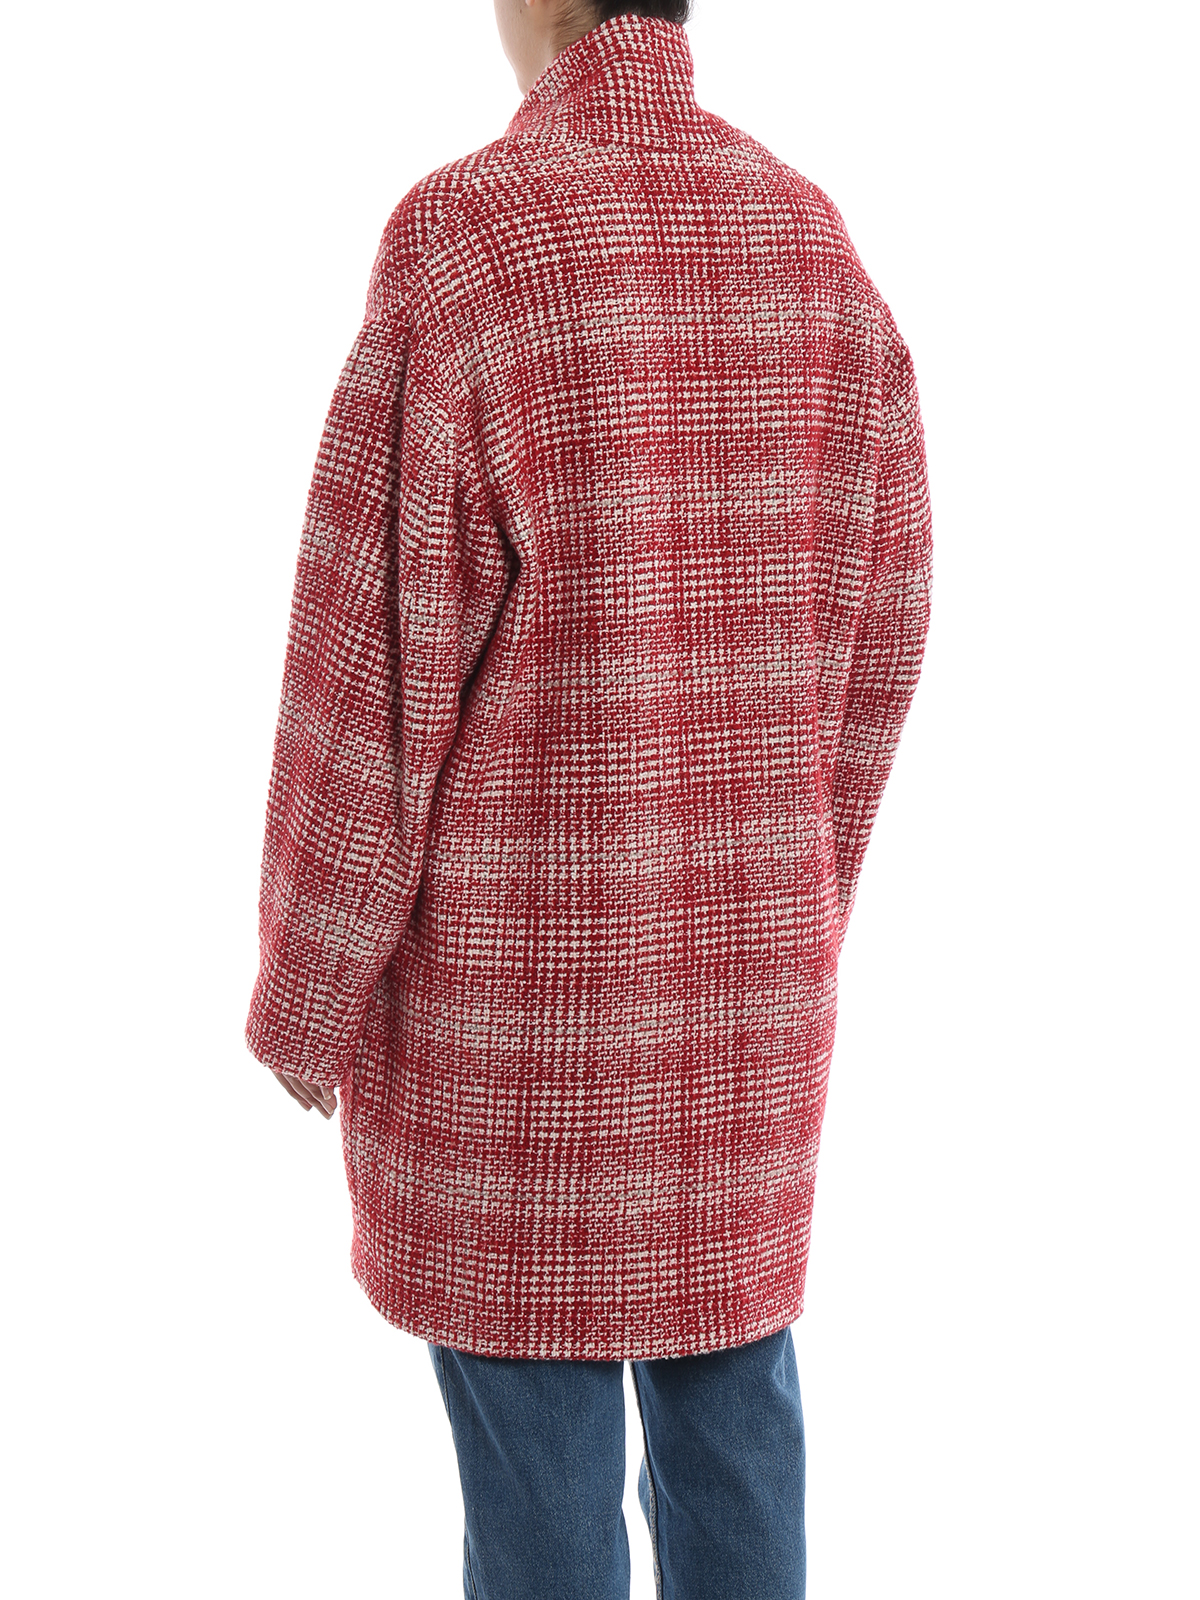 Isabel Marant Etoile Eabrie Red Chequered Tweed Short Coat Short Coats Maa005e70rd